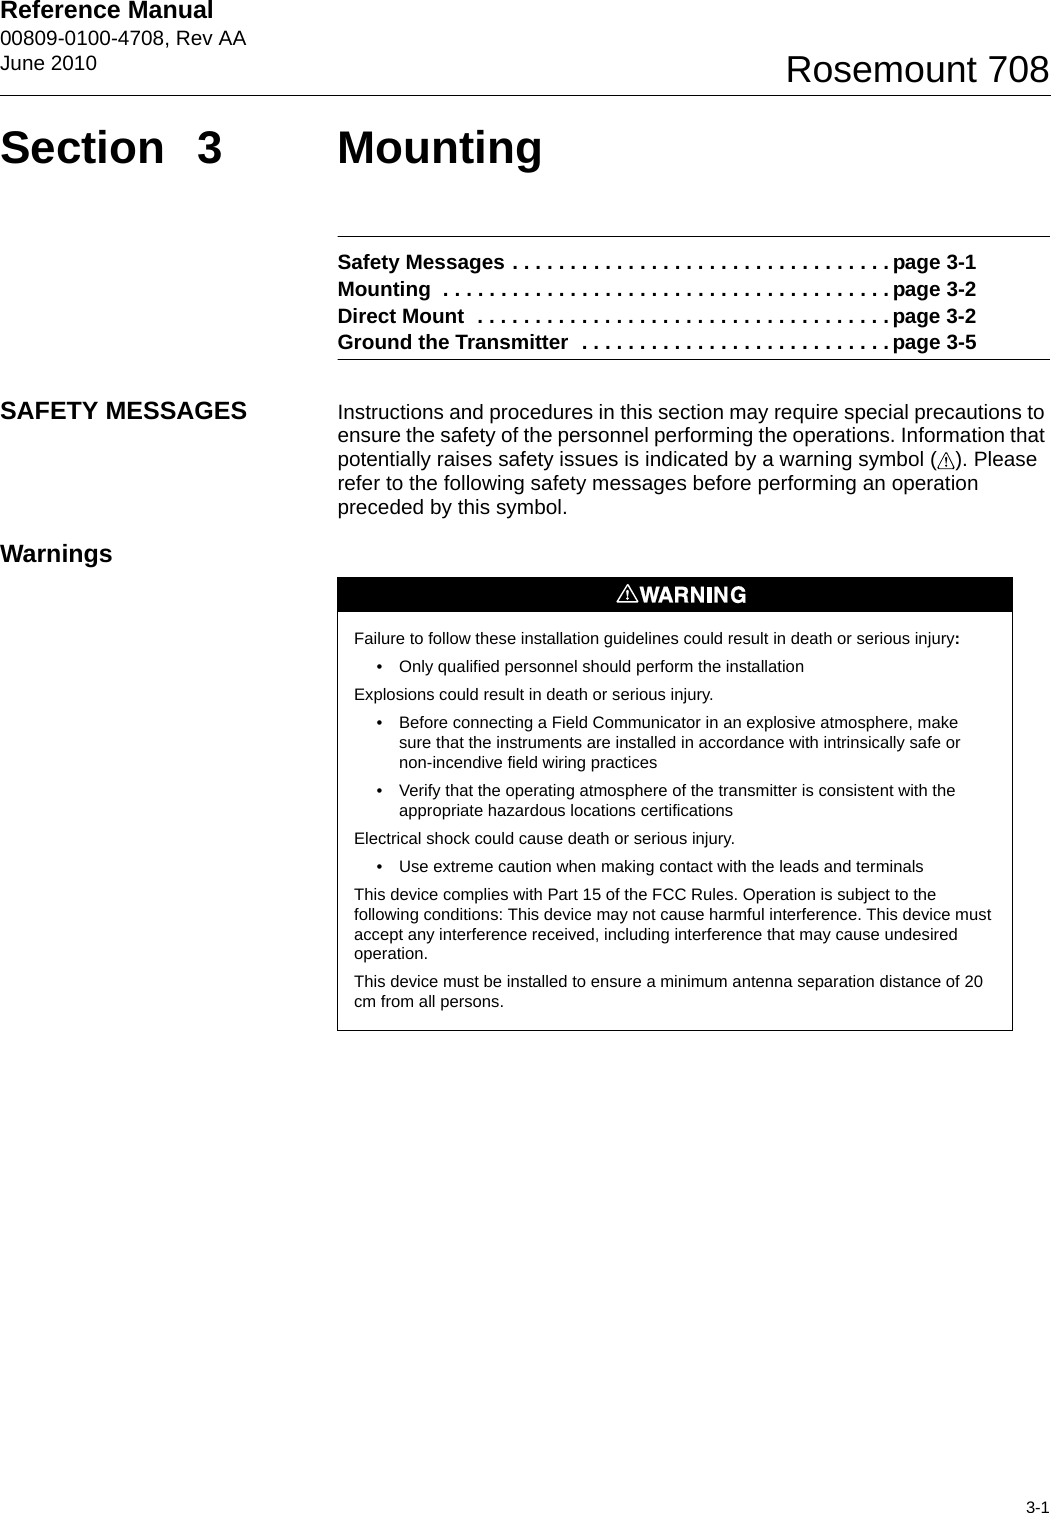 Reference Manual 00809-0100-4708, Rev AAJune 20103-1Rosemount 708Section 3 MountingSafety Messages . . . . . . . . . . . . . . . . . . . . . . . . . . . . . . . . . page 3-1Mounting  . . . . . . . . . . . . . . . . . . . . . . . . . . . . . . . . . . . . . . . page 3-2Direct Mount  . . . . . . . . . . . . . . . . . . . . . . . . . . . . . . . . . . . . page 3-2Ground the Transmitter  . . . . . . . . . . . . . . . . . . . . . . . . . . . page 3-5SAFETY MESSAGES Instructions and procedures in this section may require special precautions to ensure the safety of the personnel performing the operations. Information that potentially raises safety issues is indicated by a warning symbol ( ). Please refer to the following safety messages before performing an operation preceded by this symbol.WarningsFailure to follow these installation guidelines could result in death or serious injury: • Only qualified personnel should perform the installationExplosions could result in death or serious injury.• Before connecting a Field Communicator in an explosive atmosphere, make sure that the instruments are installed in accordance with intrinsically safe or non-incendive field wiring practices• Verify that the operating atmosphere of the transmitter is consistent with the appropriate hazardous locations certificationsElectrical shock could cause death or serious injury.• Use extreme caution when making contact with the leads and terminalsThis device complies with Part 15 of the FCC Rules. Operation is subject to the following conditions: This device may not cause harmful interference. This device must accept any interference received, including interference that may cause undesired operation.This device must be installed to ensure a minimum antenna separation distance of 20 cm from all persons.